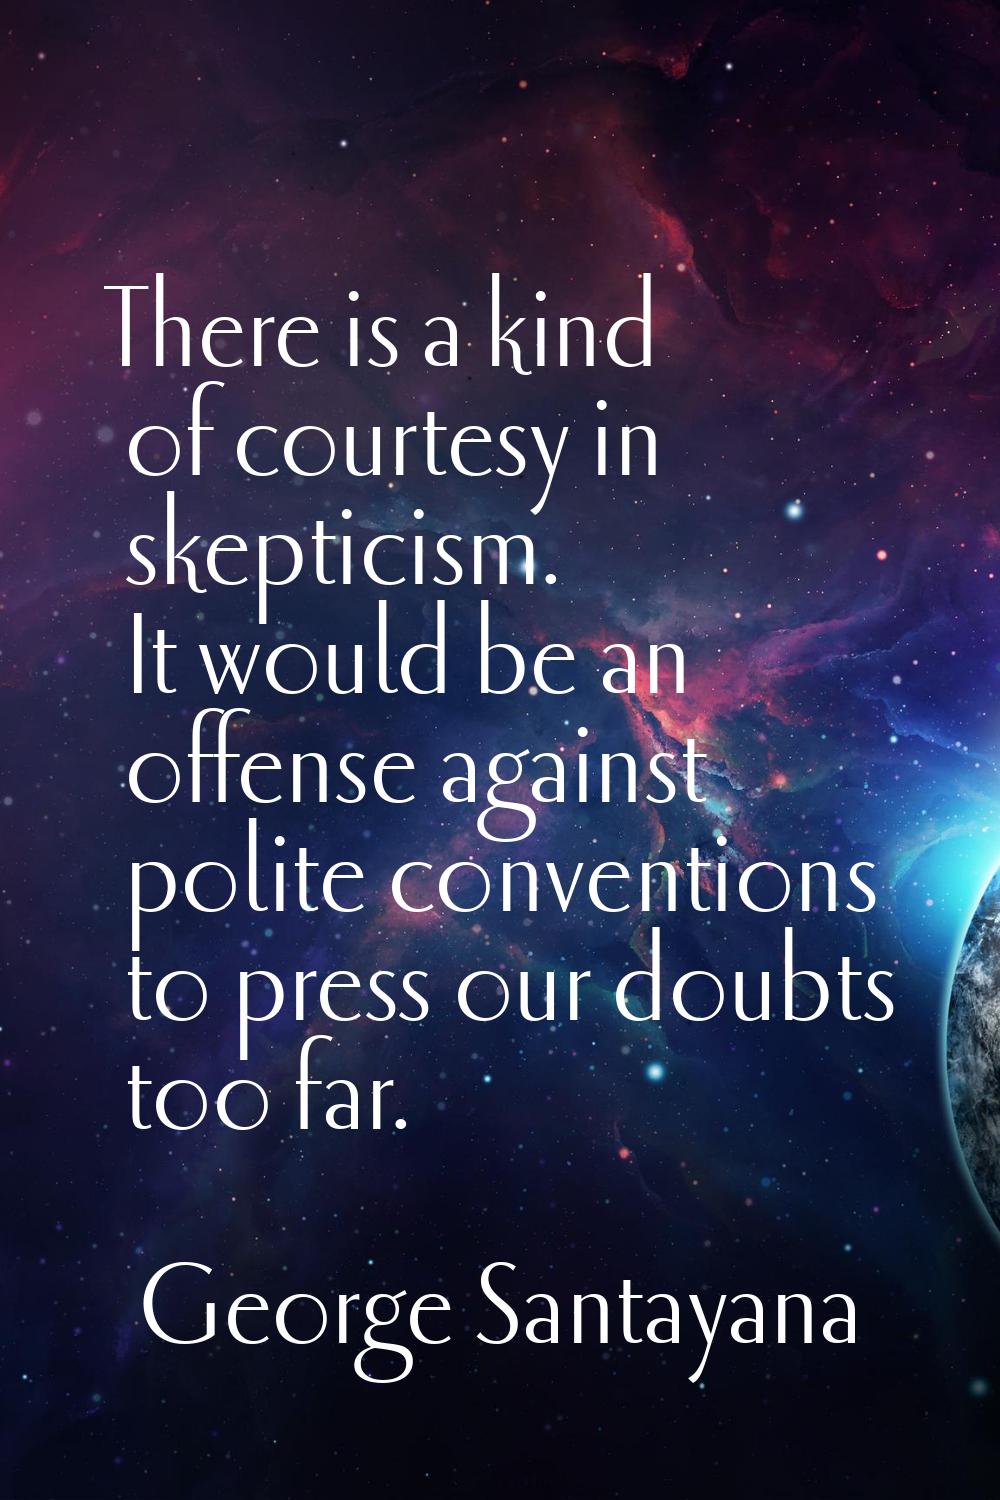 There is a kind of courtesy in skepticism. It would be an offense against polite conventions to pre